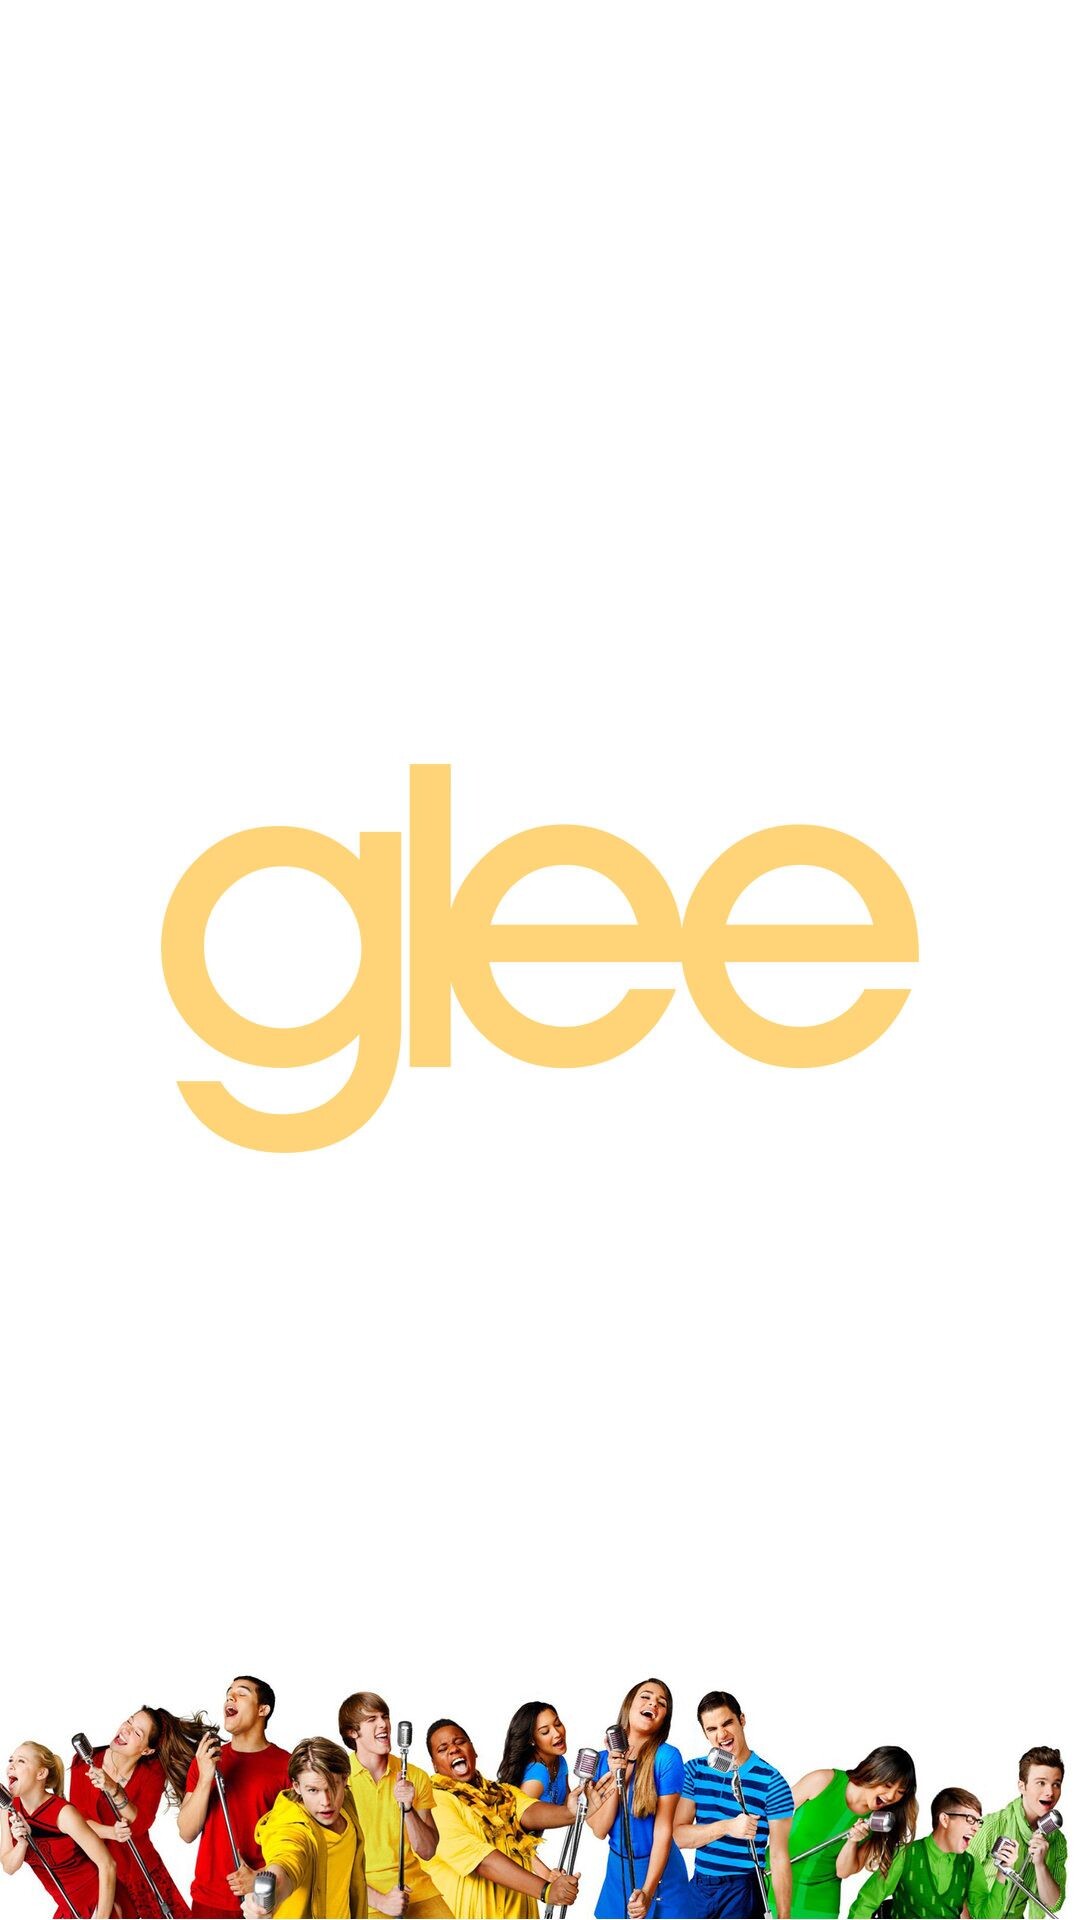 Glee (TV series): An American musical comedy-drama show, The New Directions, Lima, Choir group. 1080x1920 Full HD Background.